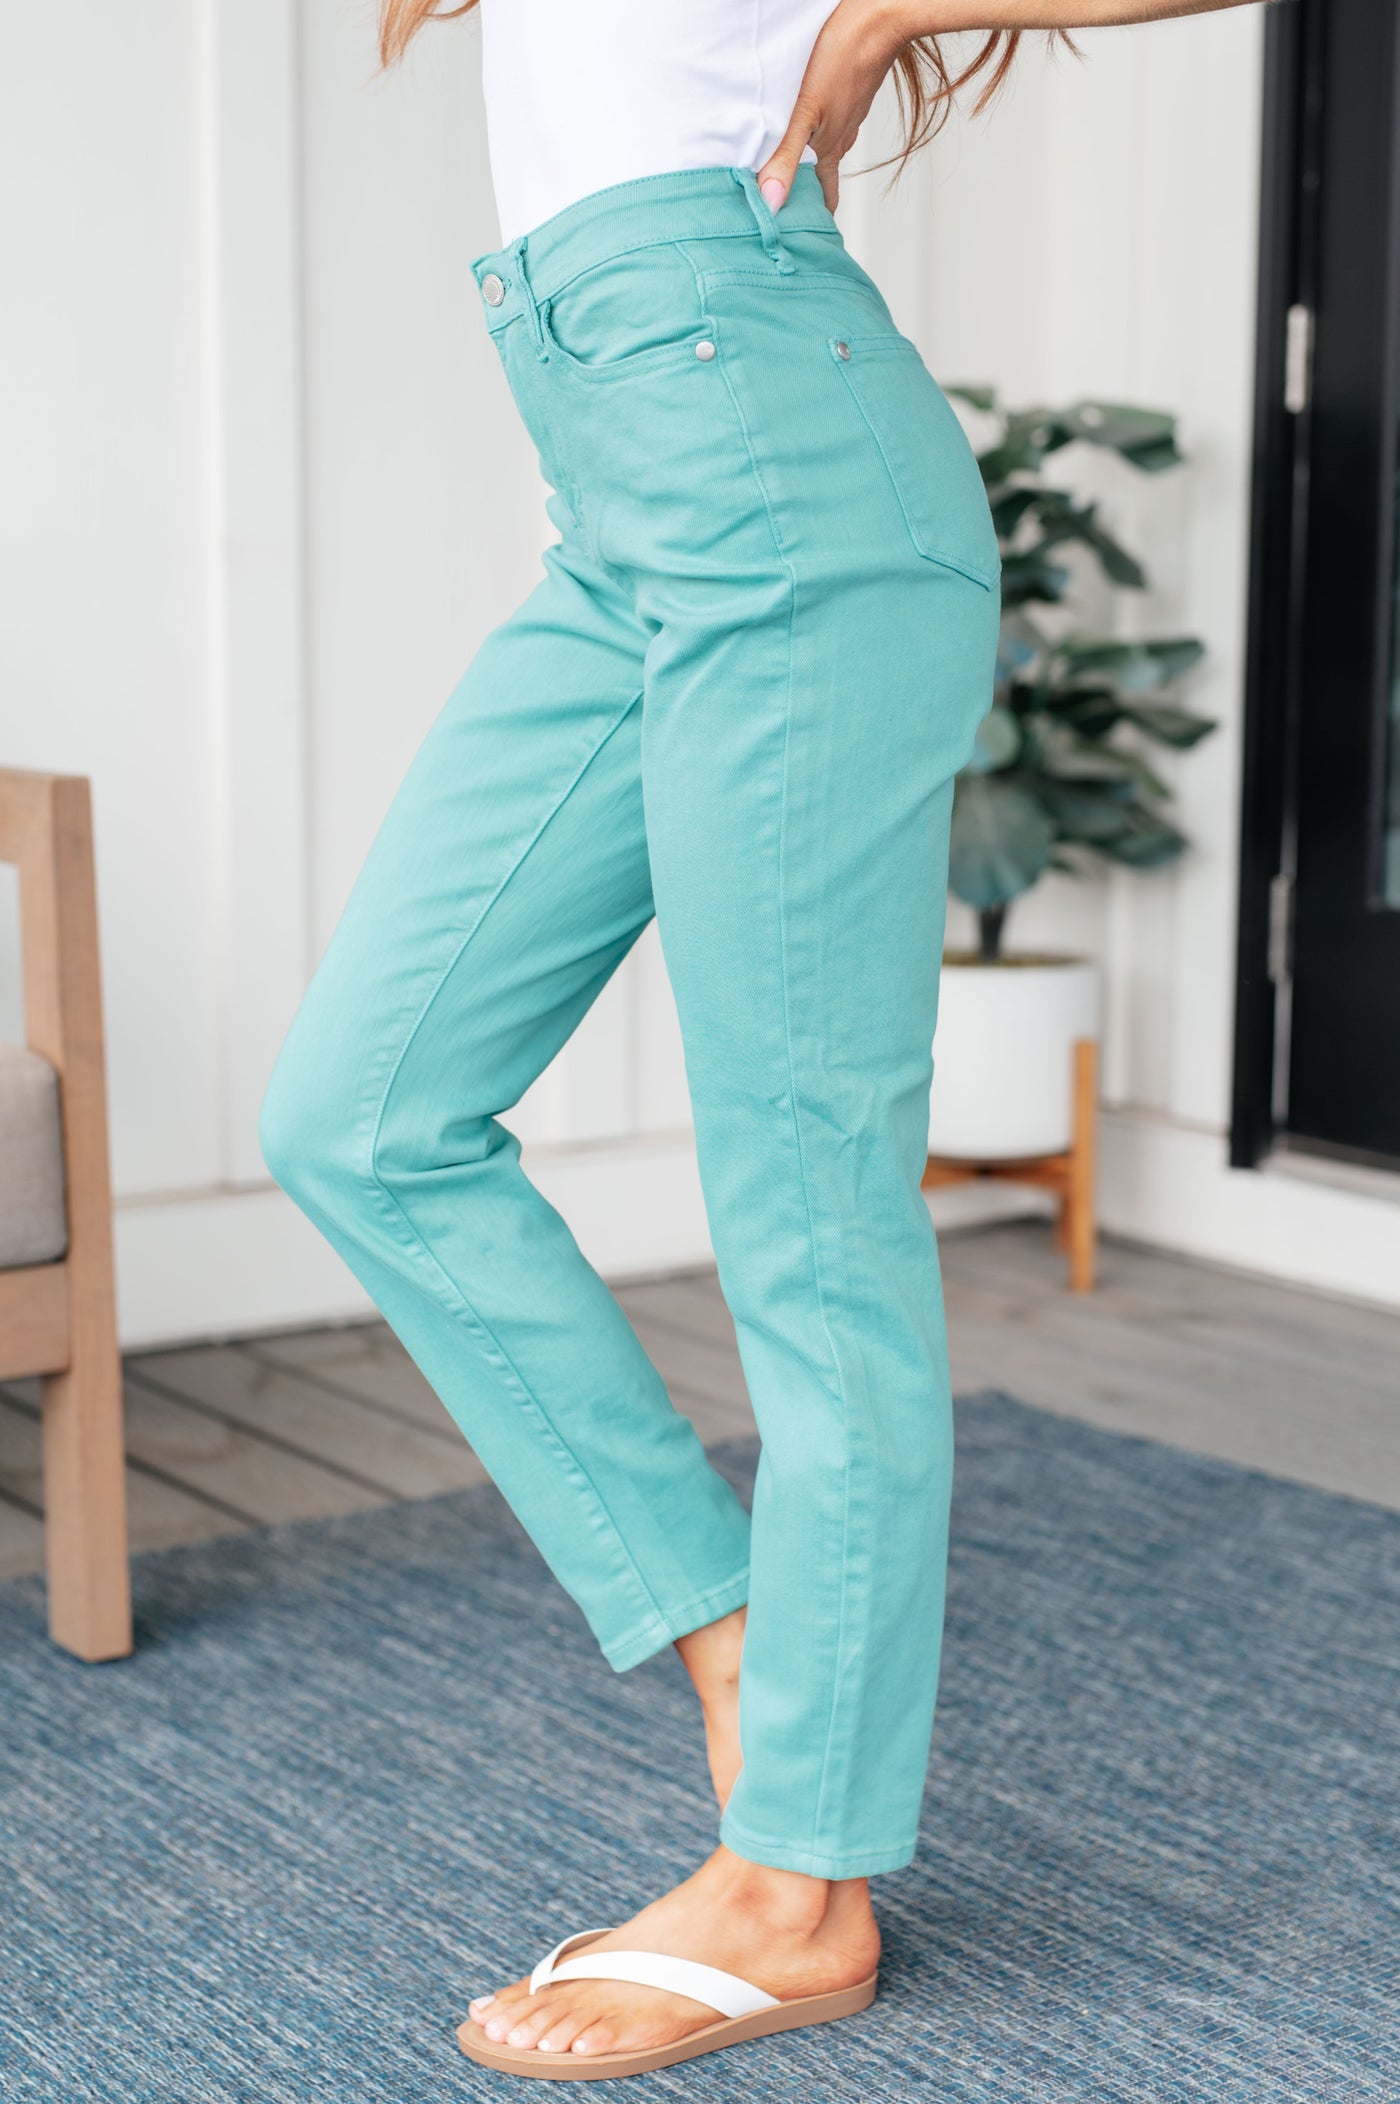 Judy Blue Bridgette High Rise Garment Dyed Slim Jeans in Aquamarine Southern Soul Collectives